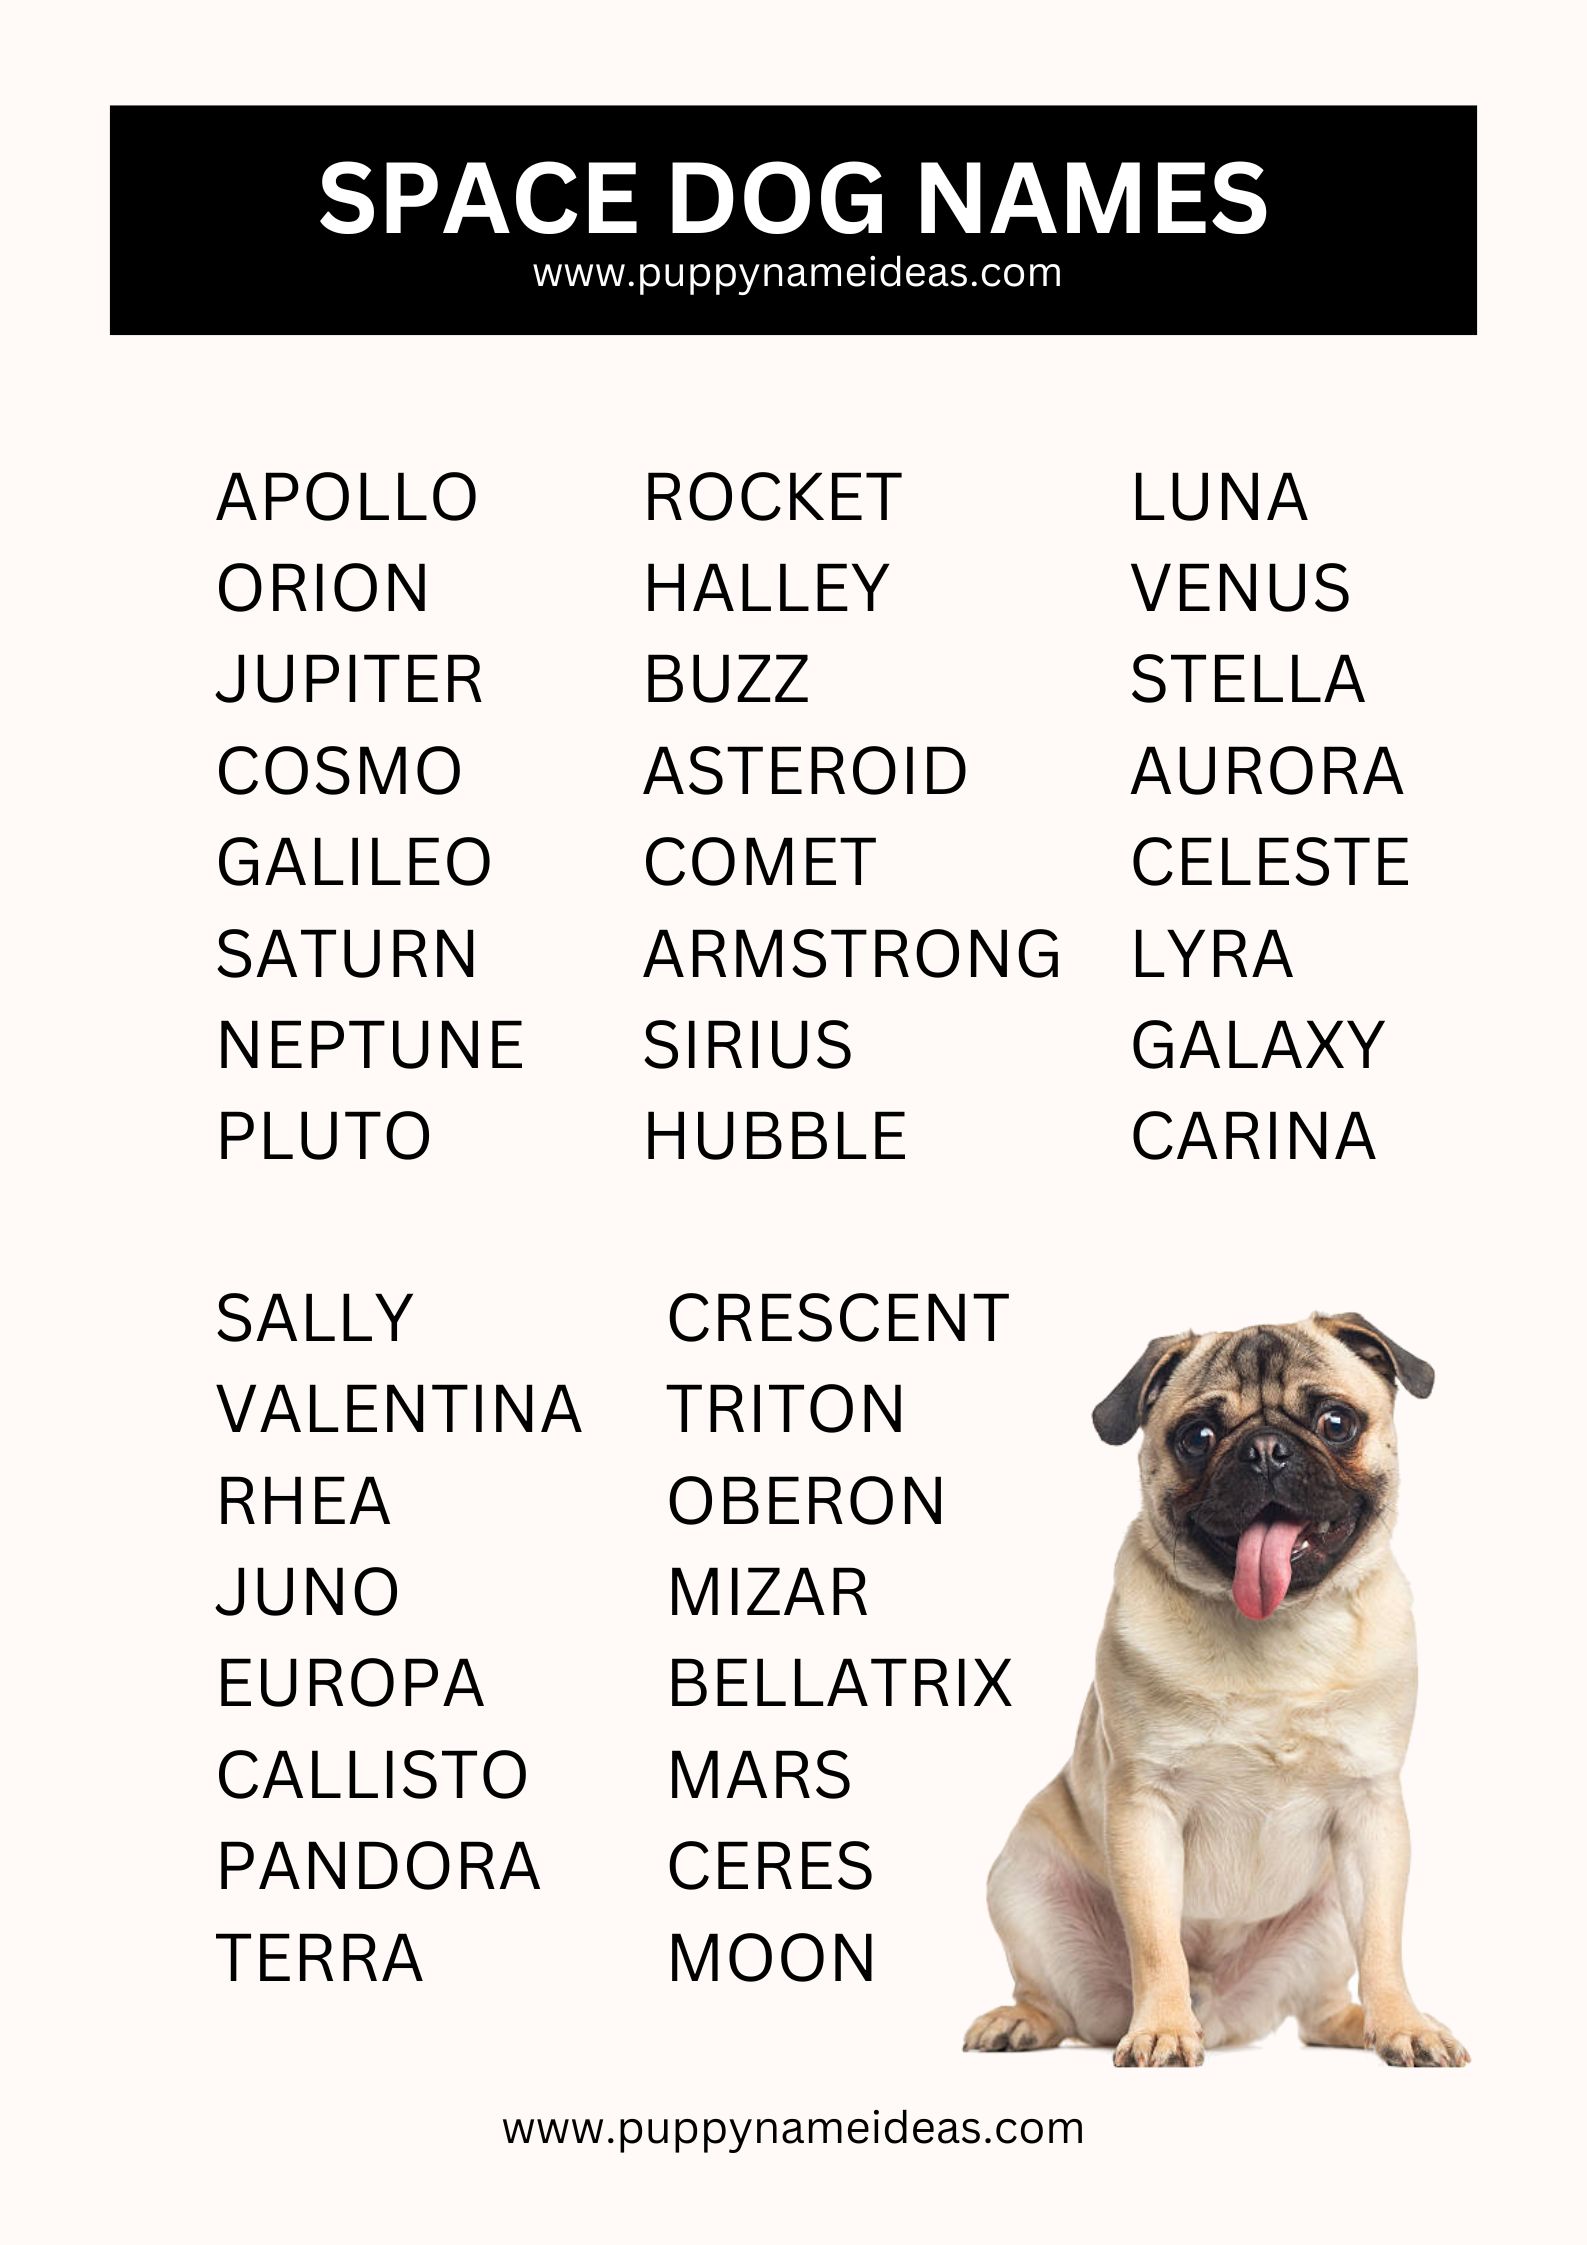 List Of Space Dog Names